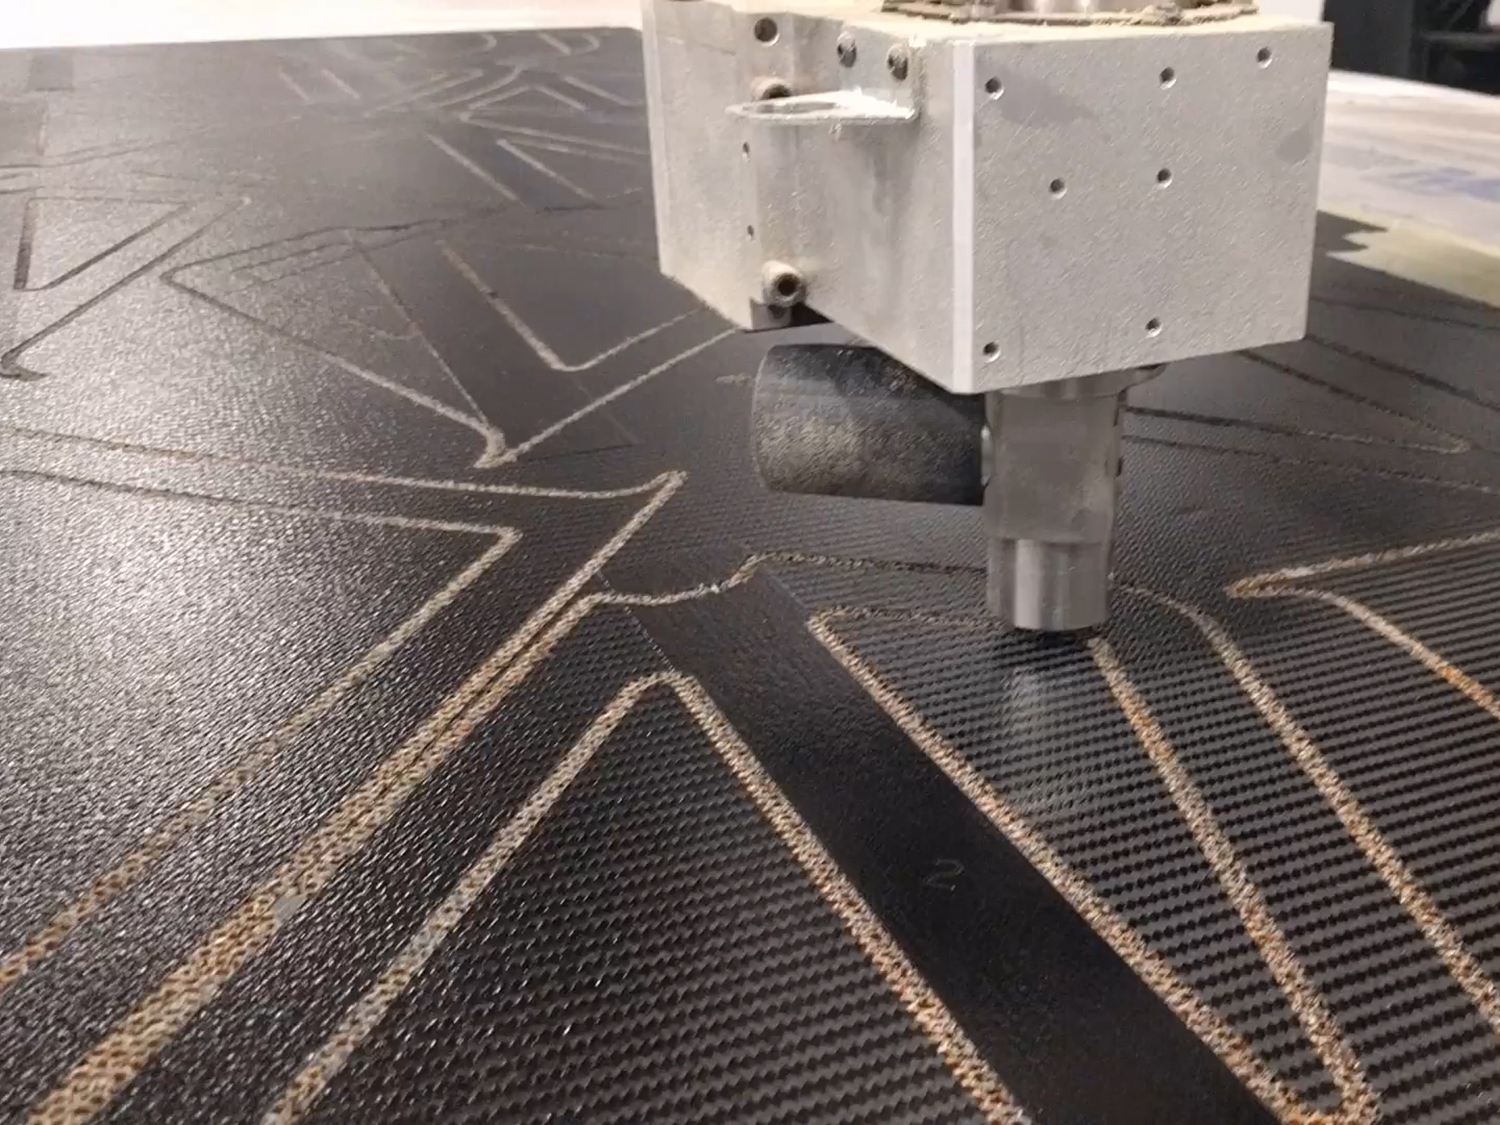 3D CNC Router - Drag & Oscillating Knives